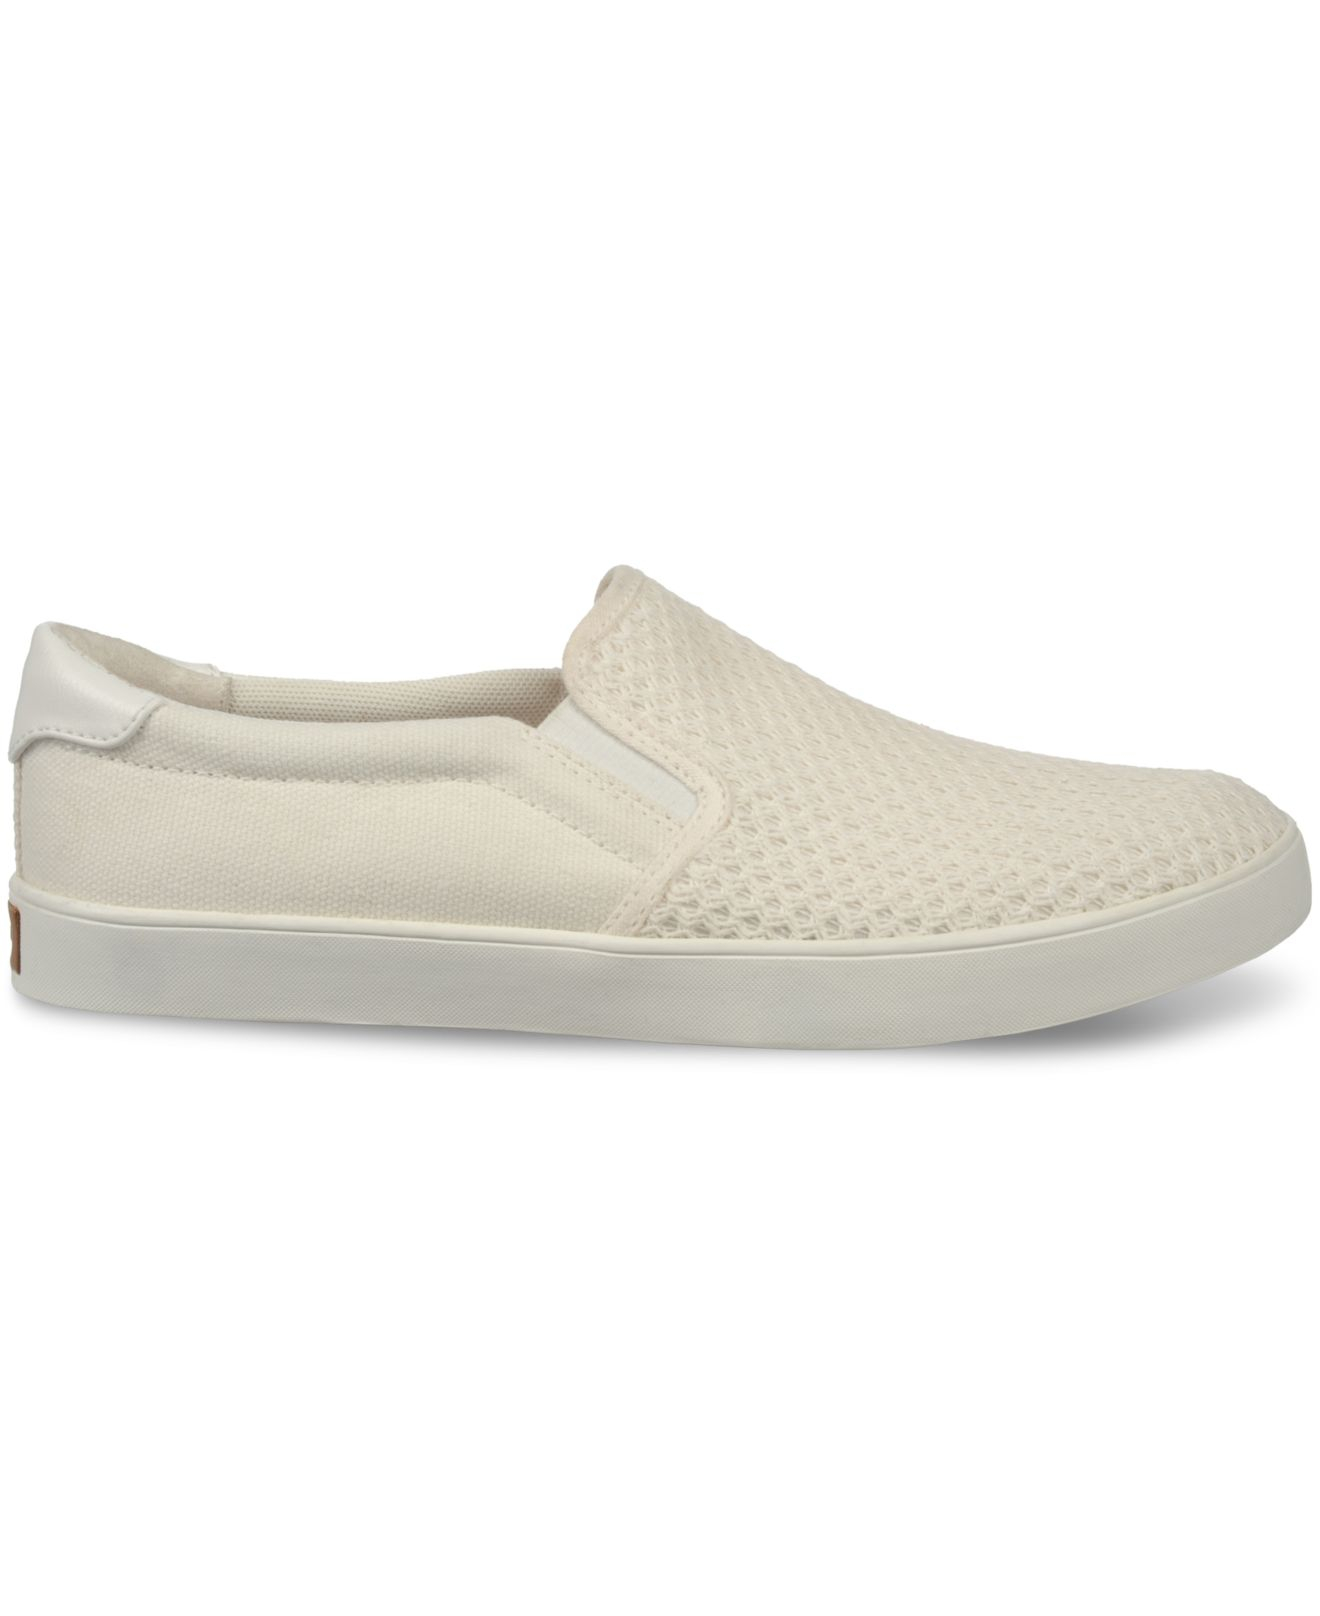 Lyst - Dr. Scholls Madison Sneakers in White